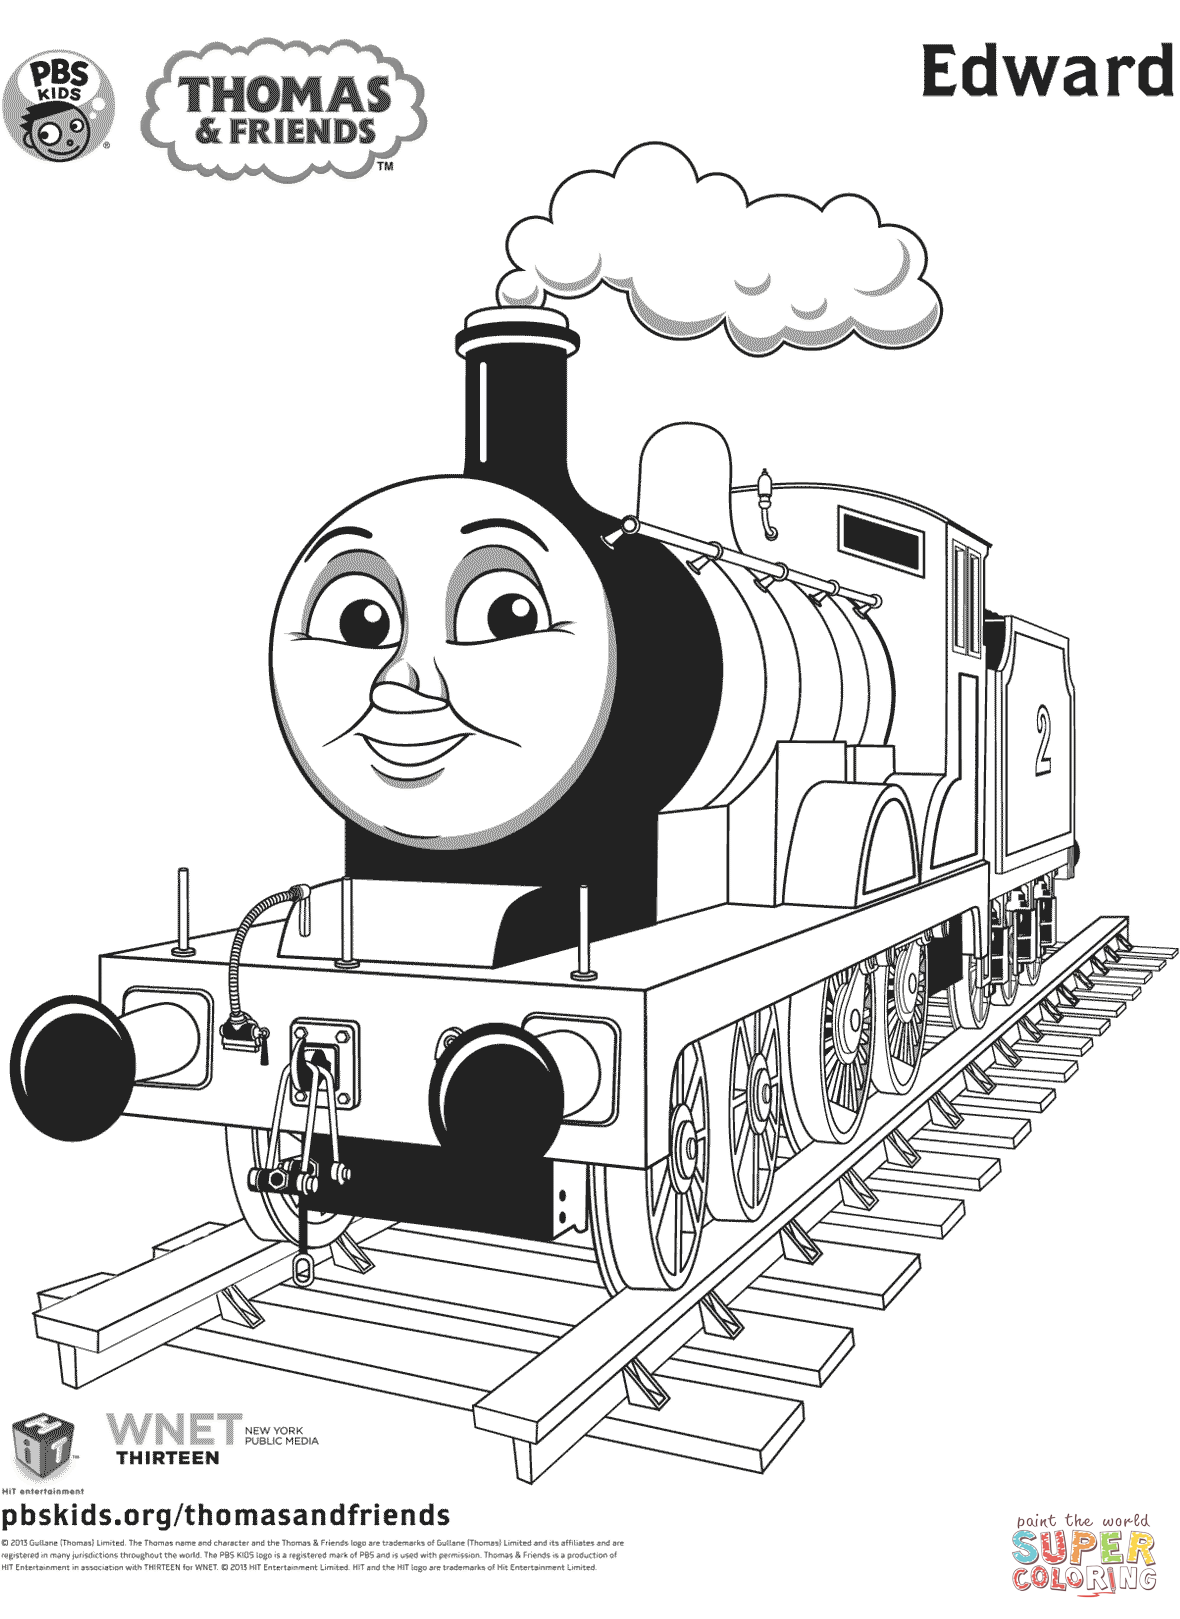 Edward From Thomas Friends Coloring Page Free 